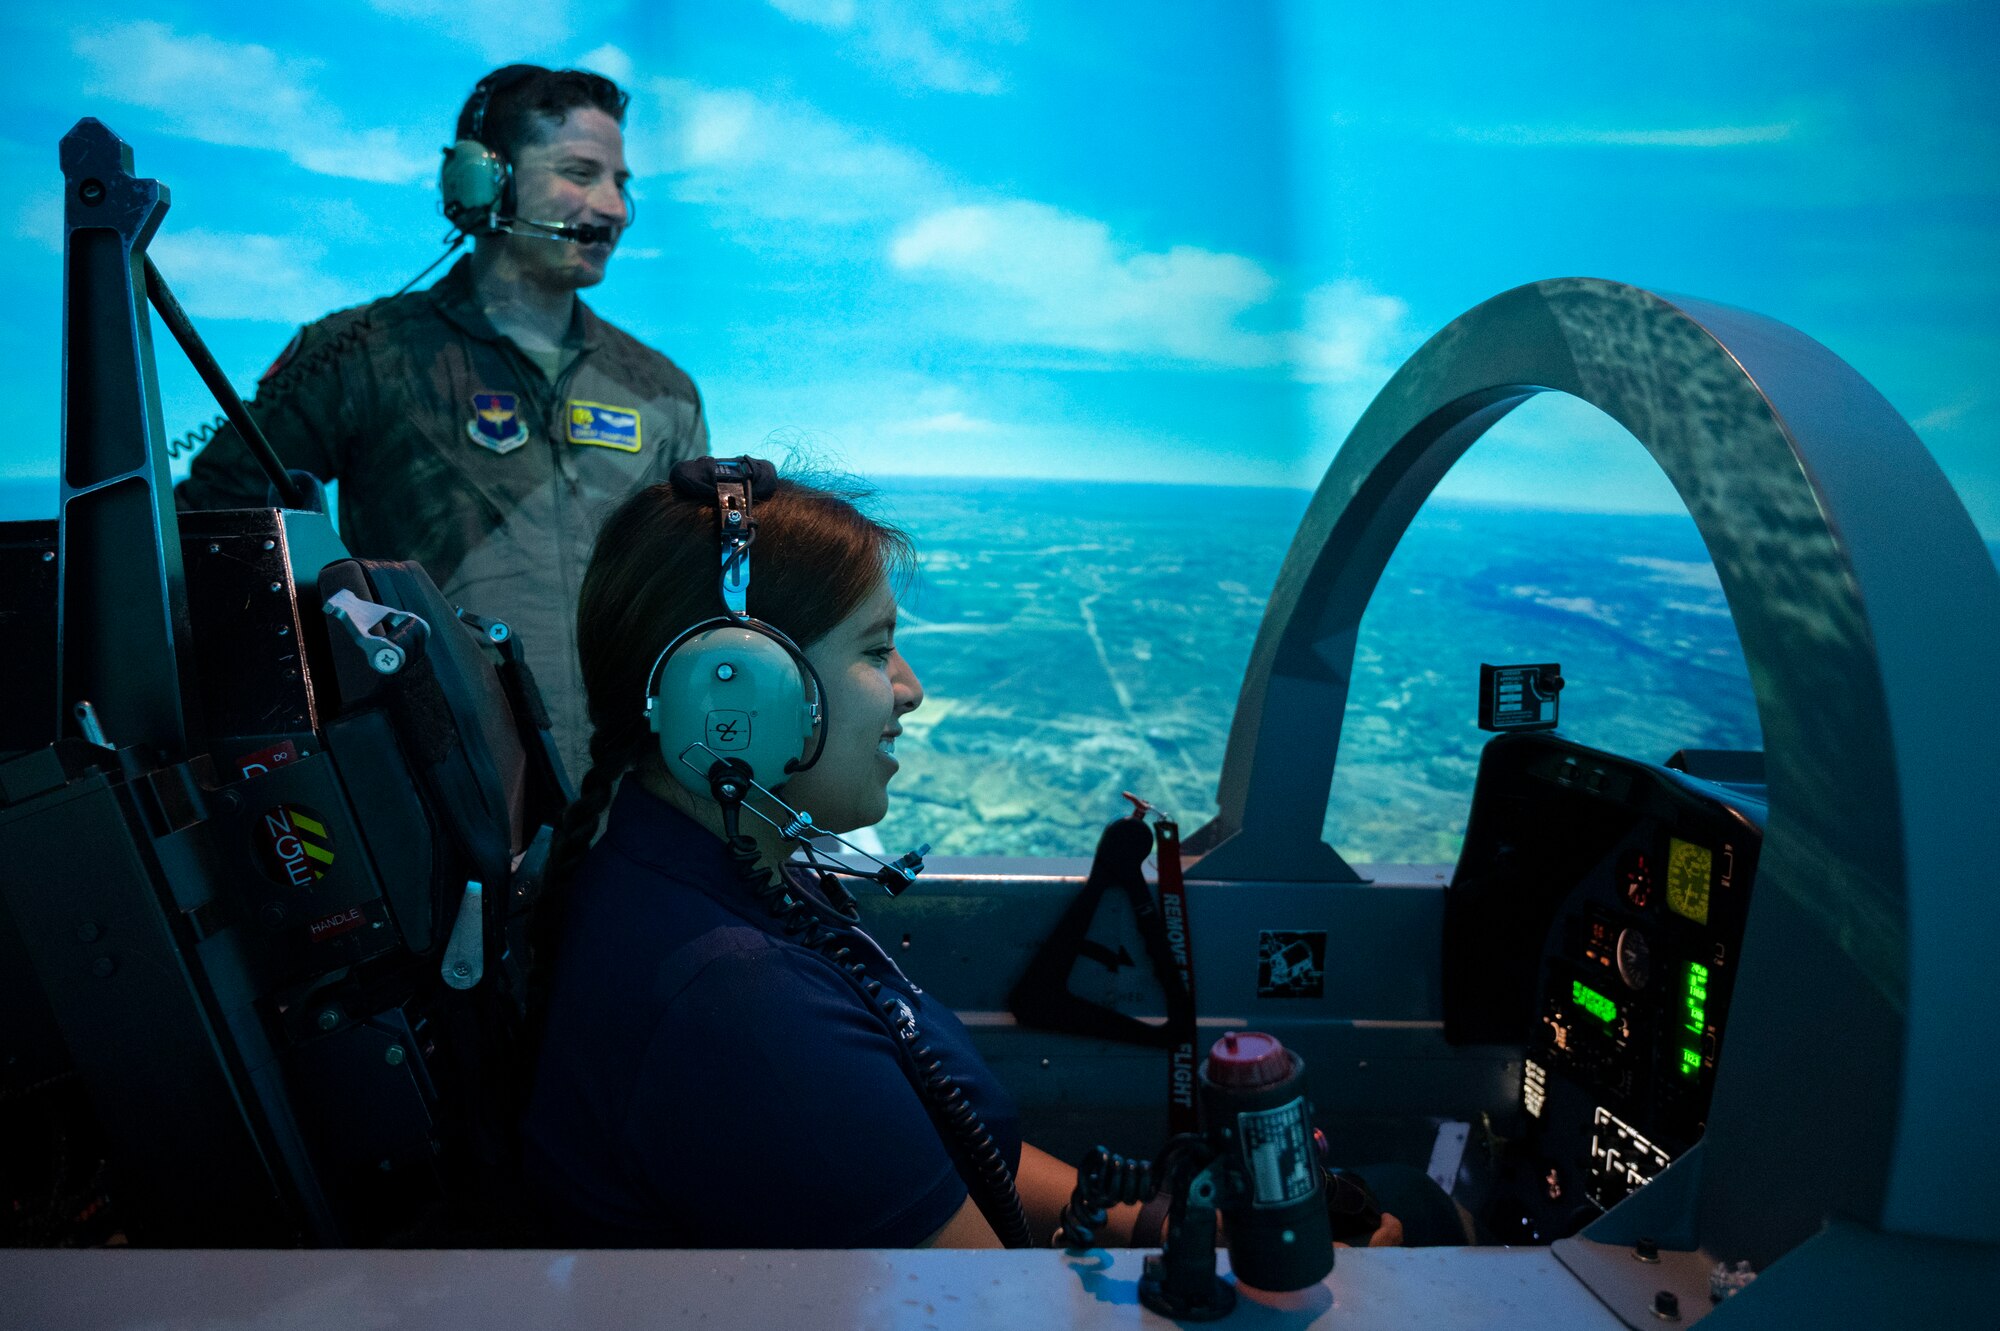 U.S. Air Force Capt. John Champagne (left), 85th Flying Training Squadron flight simulator instructor, teaches Carla Robles, Del Rio High School Junior Reserve Officer’s Training Corps cadet, how to fly a T-6A Texan II flight simulator at Laughlin Air Force Base, Texas, June 7, 2023. Robles visited Laughlin to gain insight into leading Laughlin’s mission and service members towards success under the guidance of Col. Kevin Davidson, 47th Flying Training Wing commander. (U.S. Air Force photo by Airman 1st Class Kailee Reynolds)